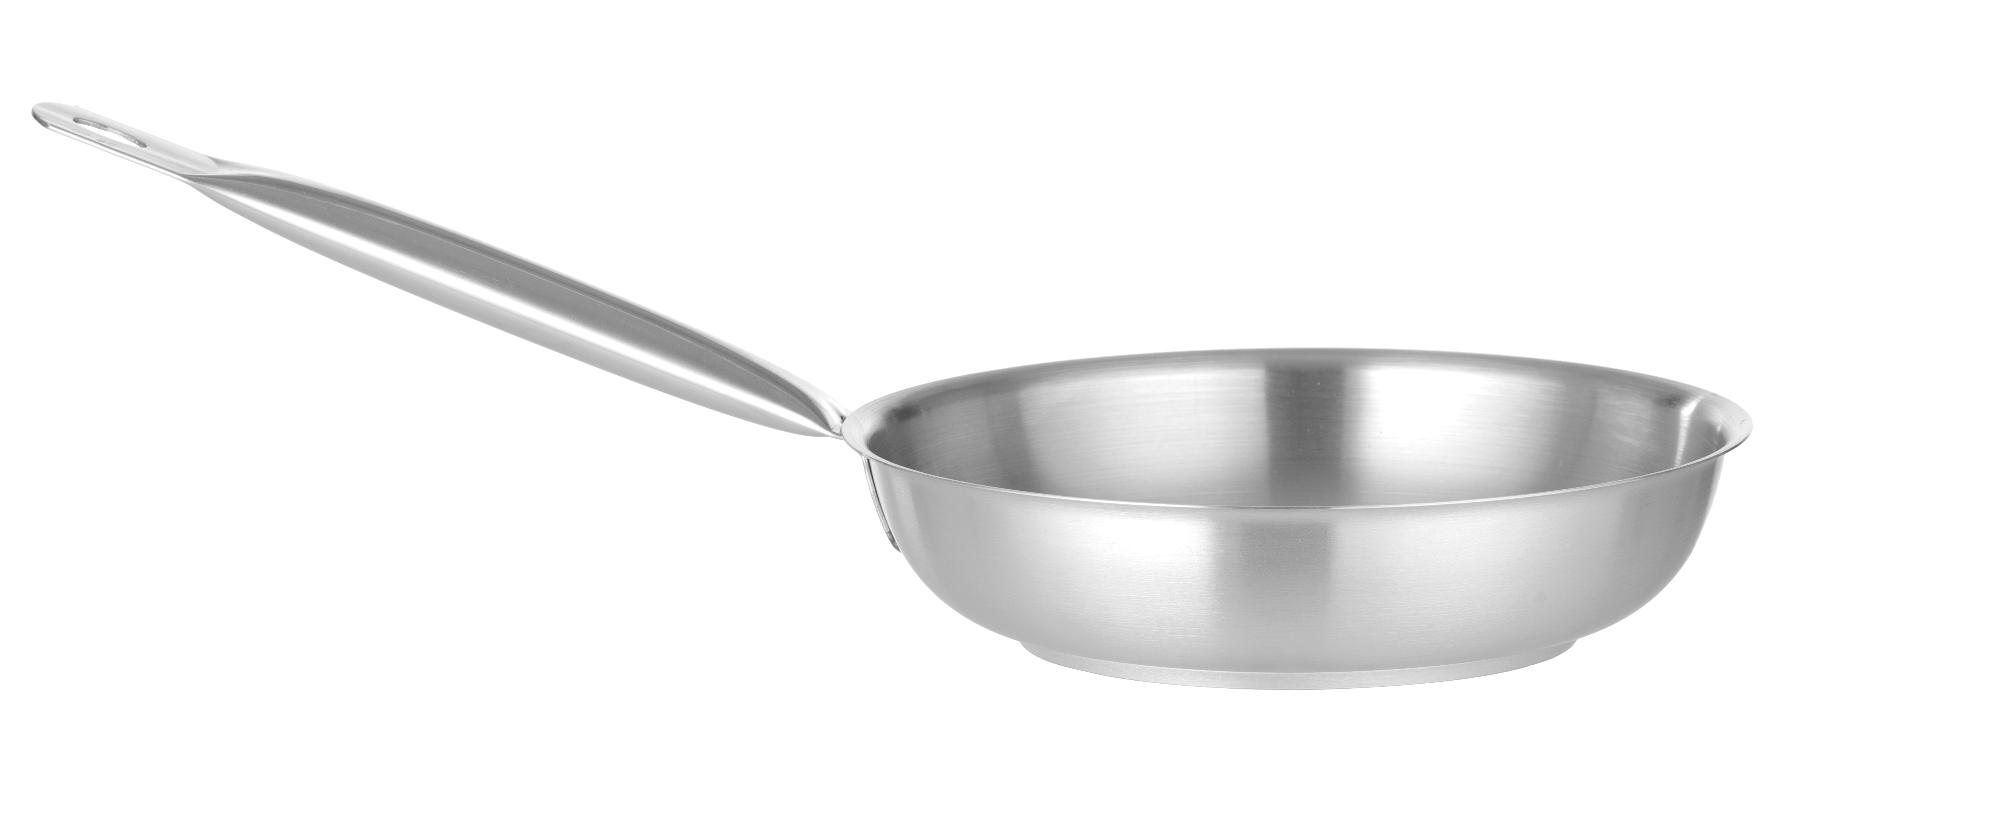 Stainless steel frying pan, 280mm